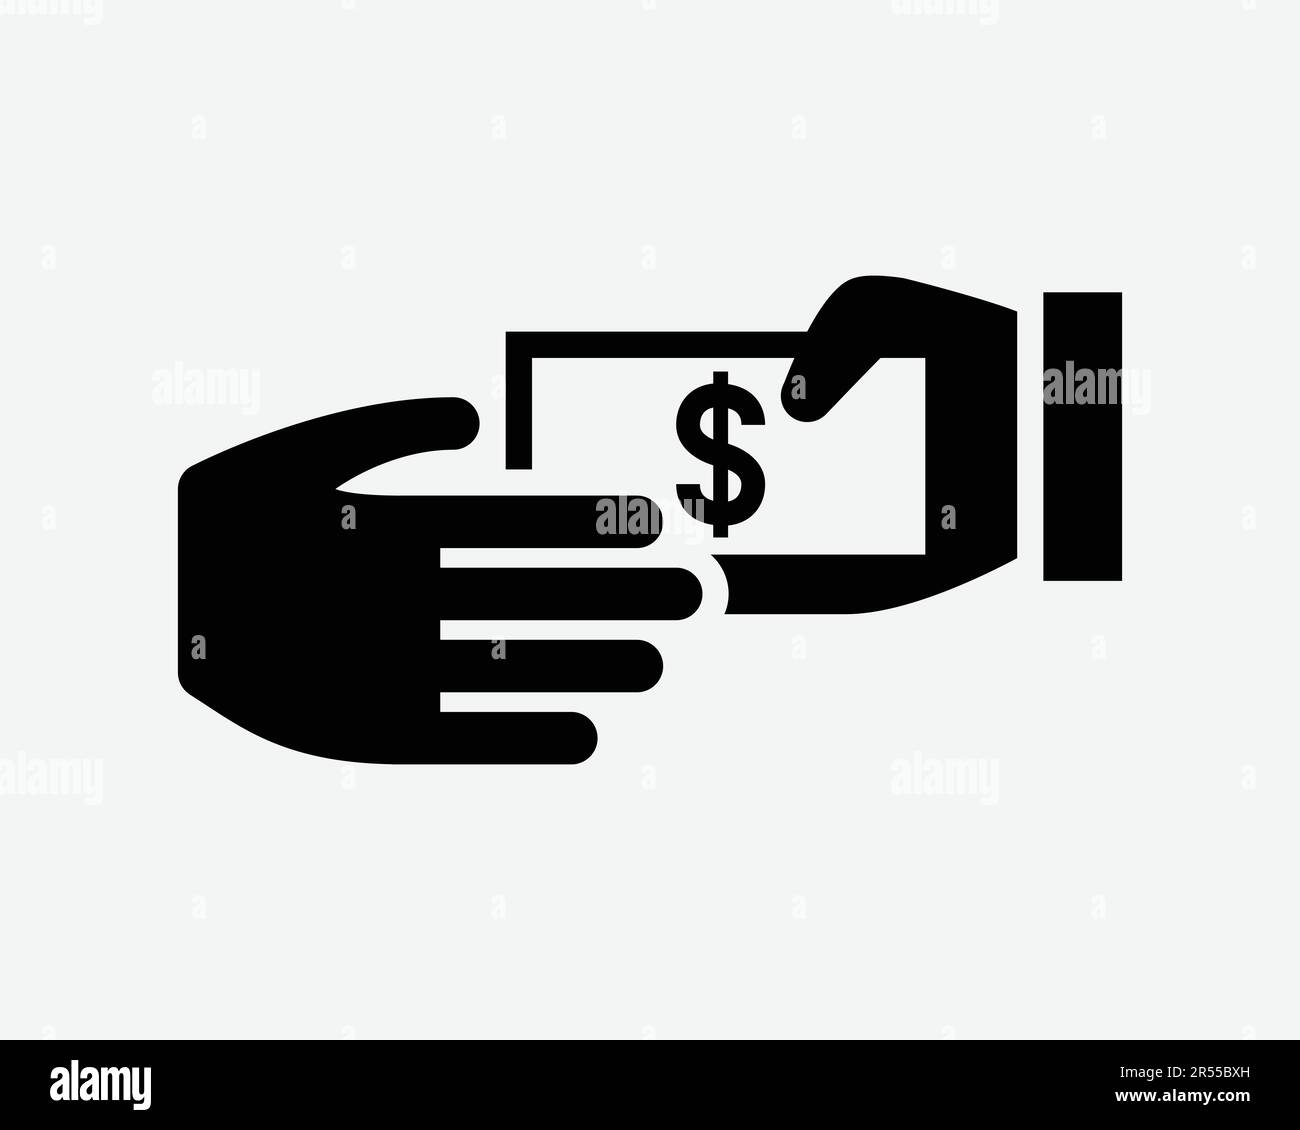 Cash Payment Icon. Finance Pay Money Investment Exchange Hand Bank Banking Loan Note Sign Symbol Black Artwork Graphic Illustration Clipart EPS Vector Stock Vector